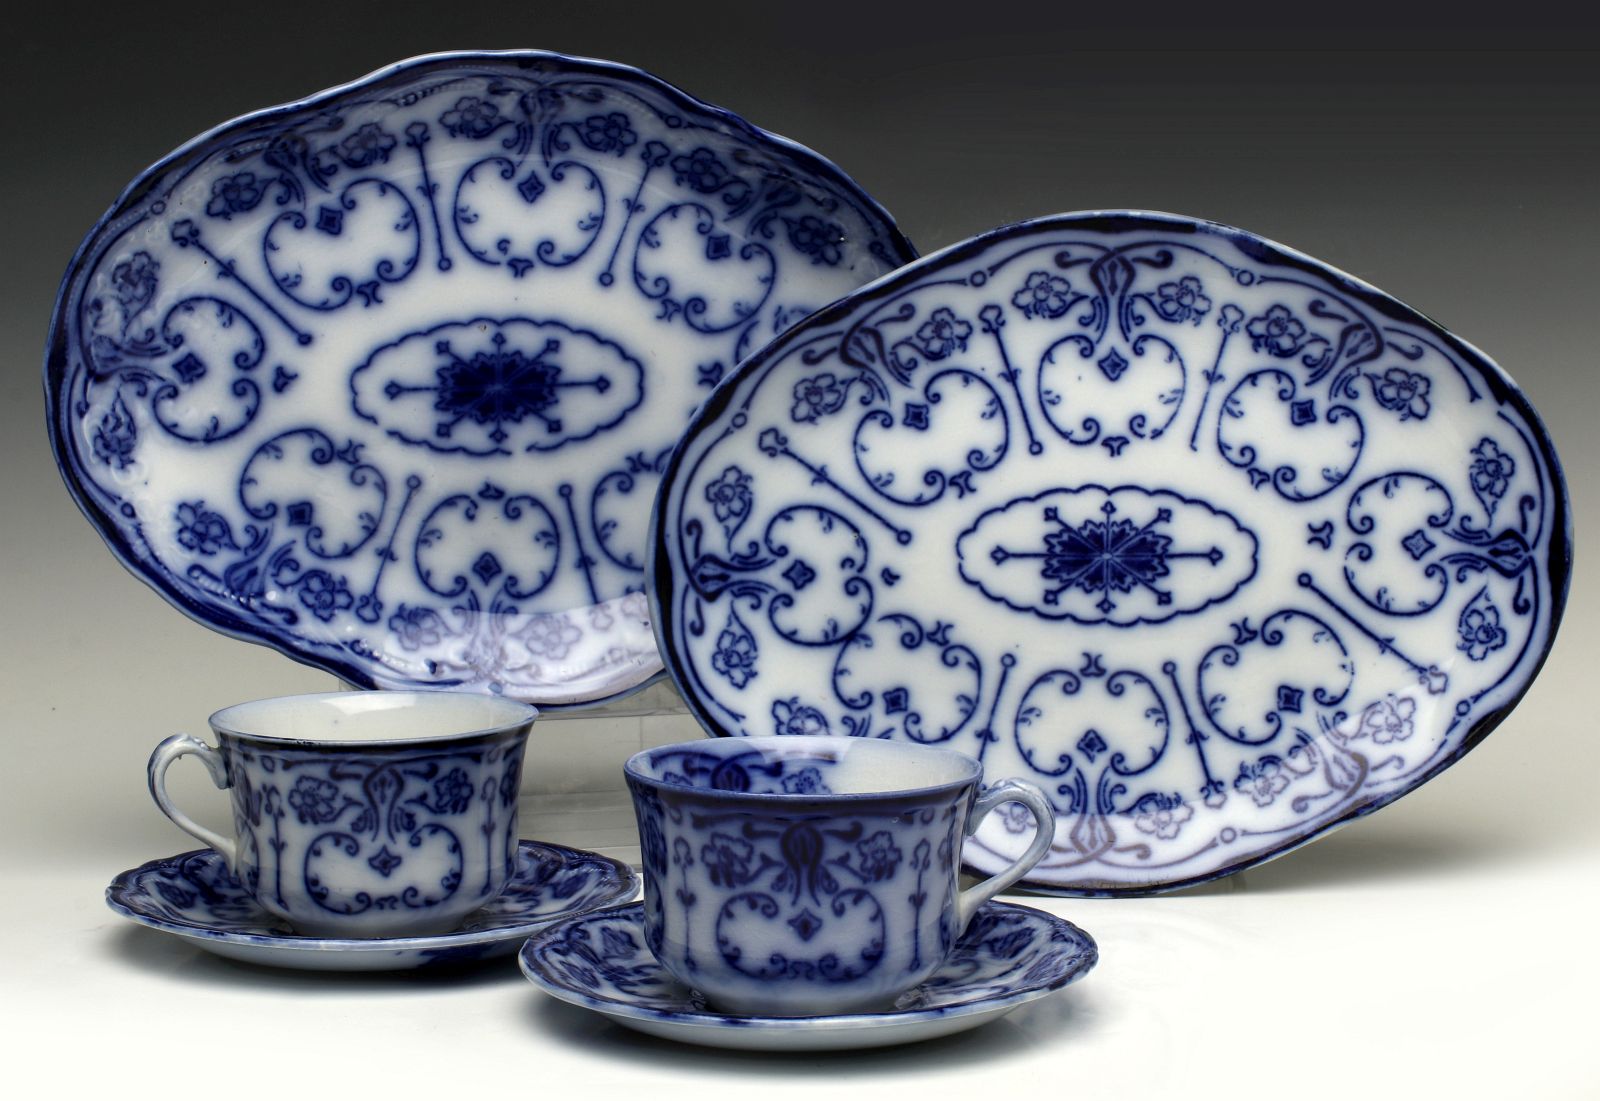 CONWAY FLOW BLUE TRAYS, CUPS AND SAUCERS